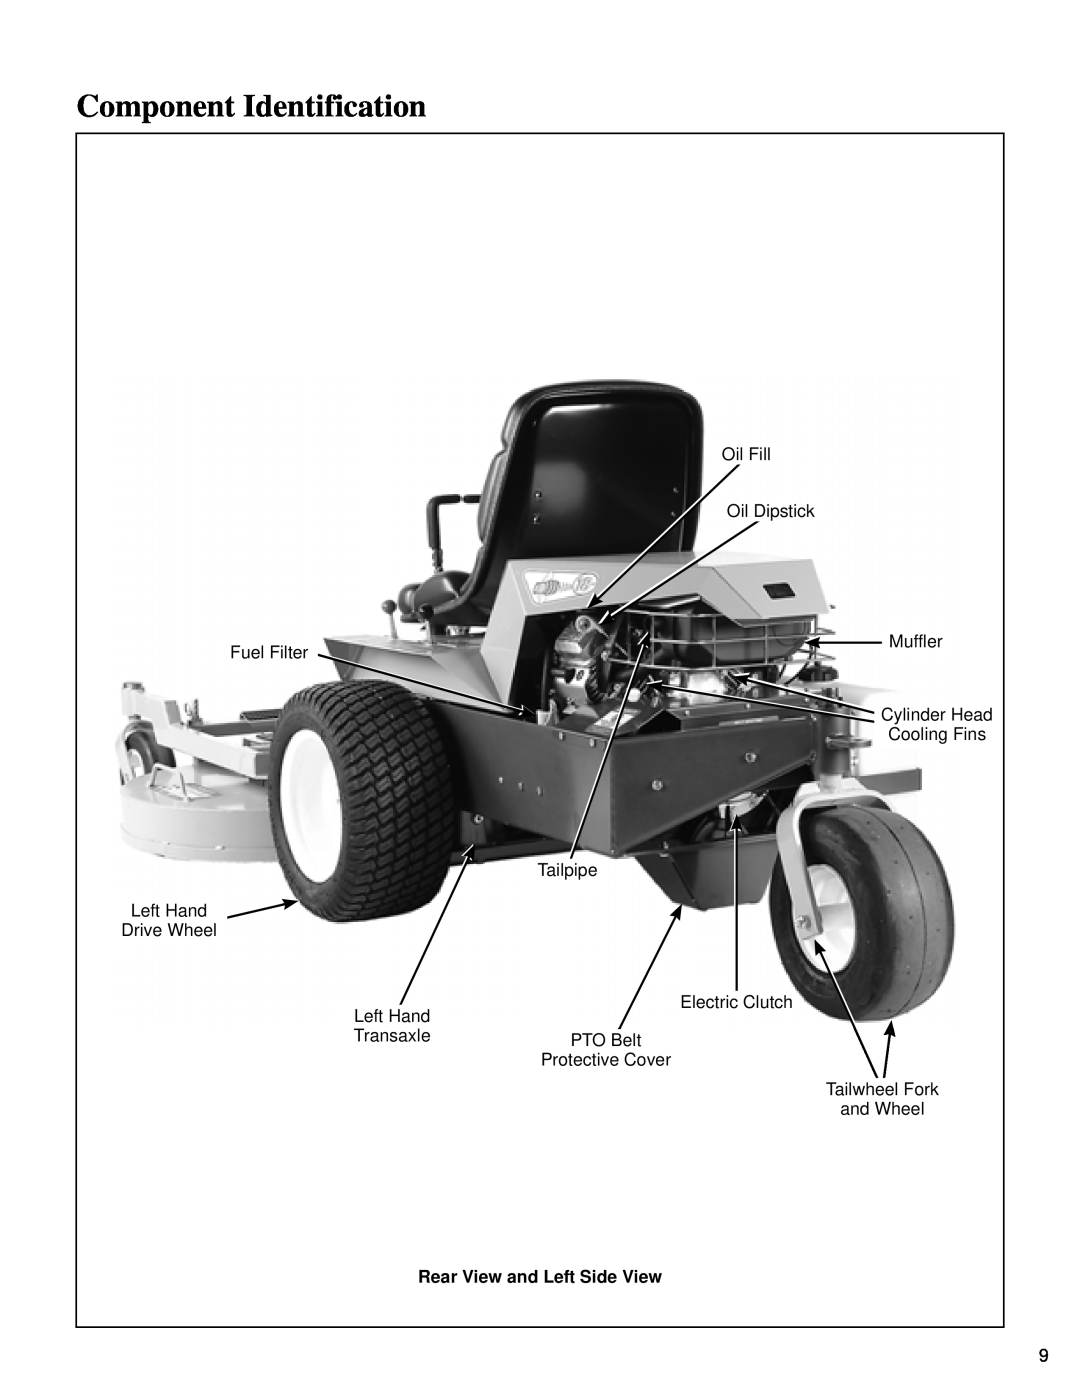 Briggs & Stratton MB (18 HP) owner manual Component Identification, Rear View and Left Side View 